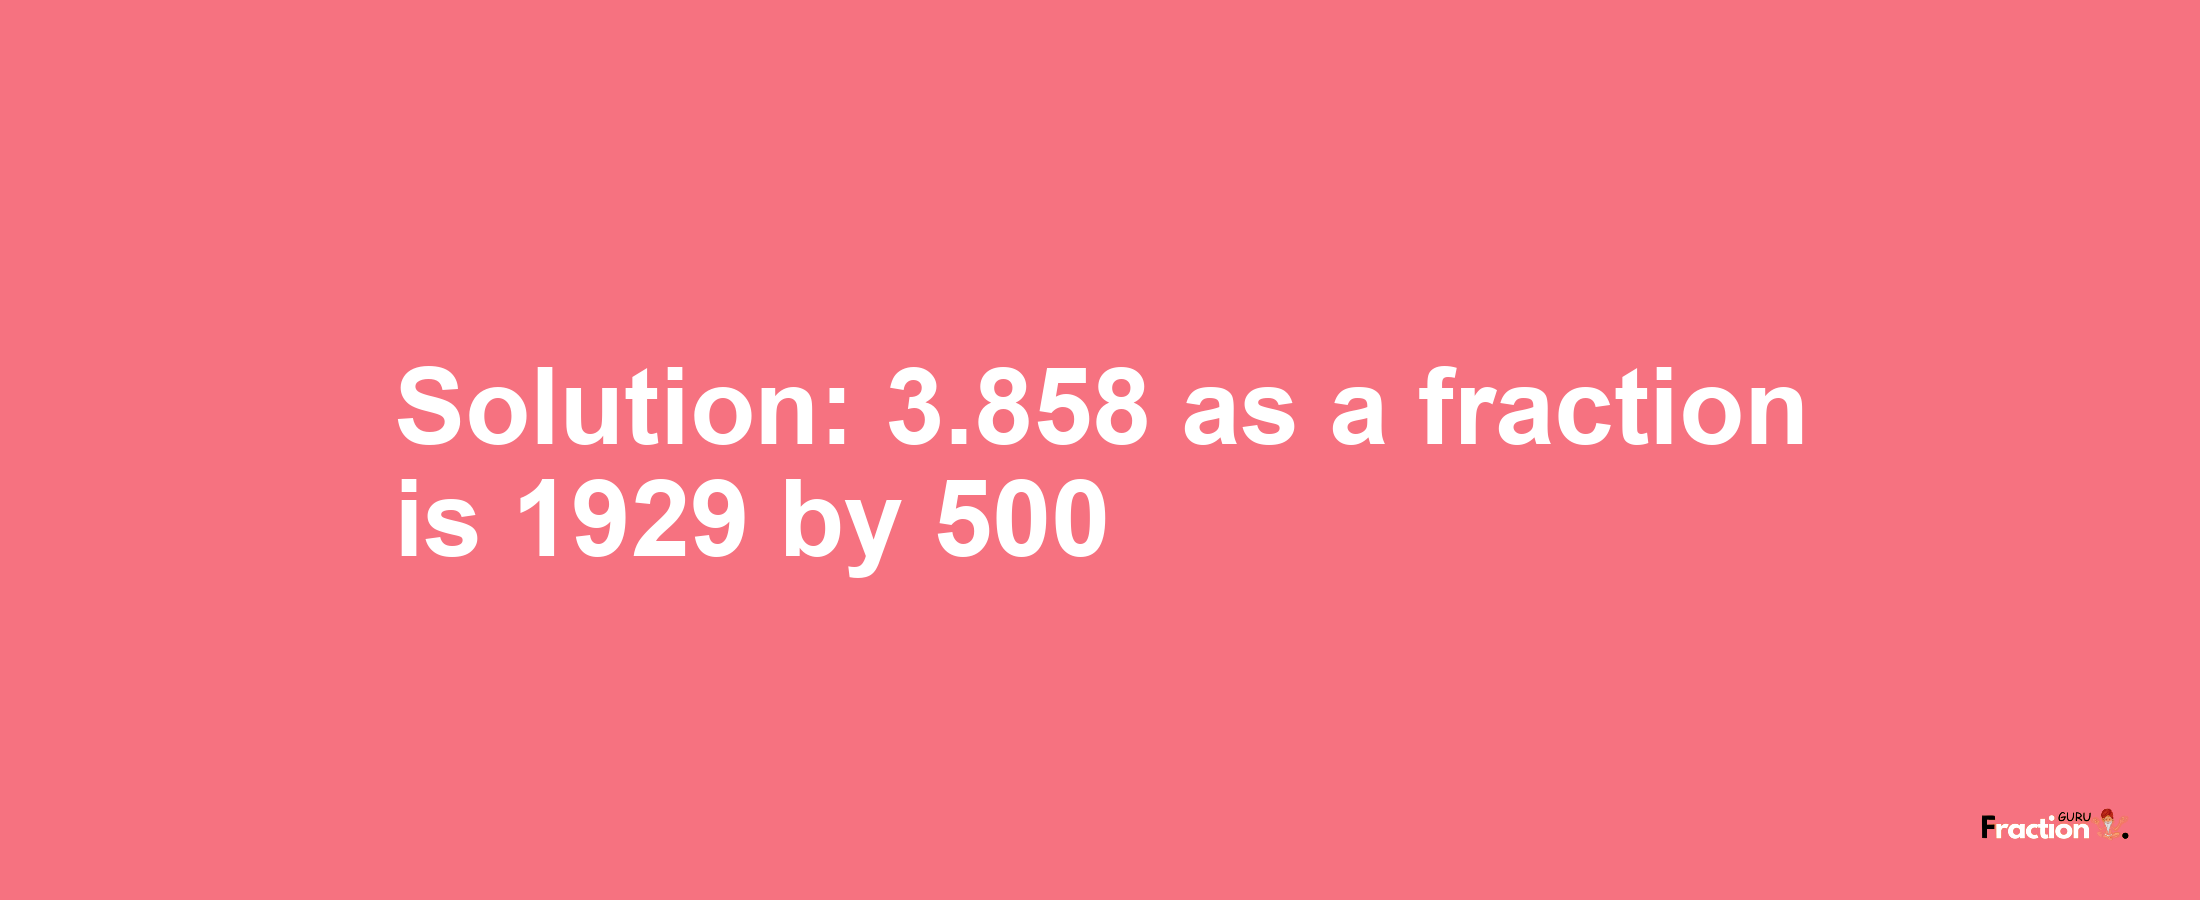 Solution:3.858 as a fraction is 1929/500